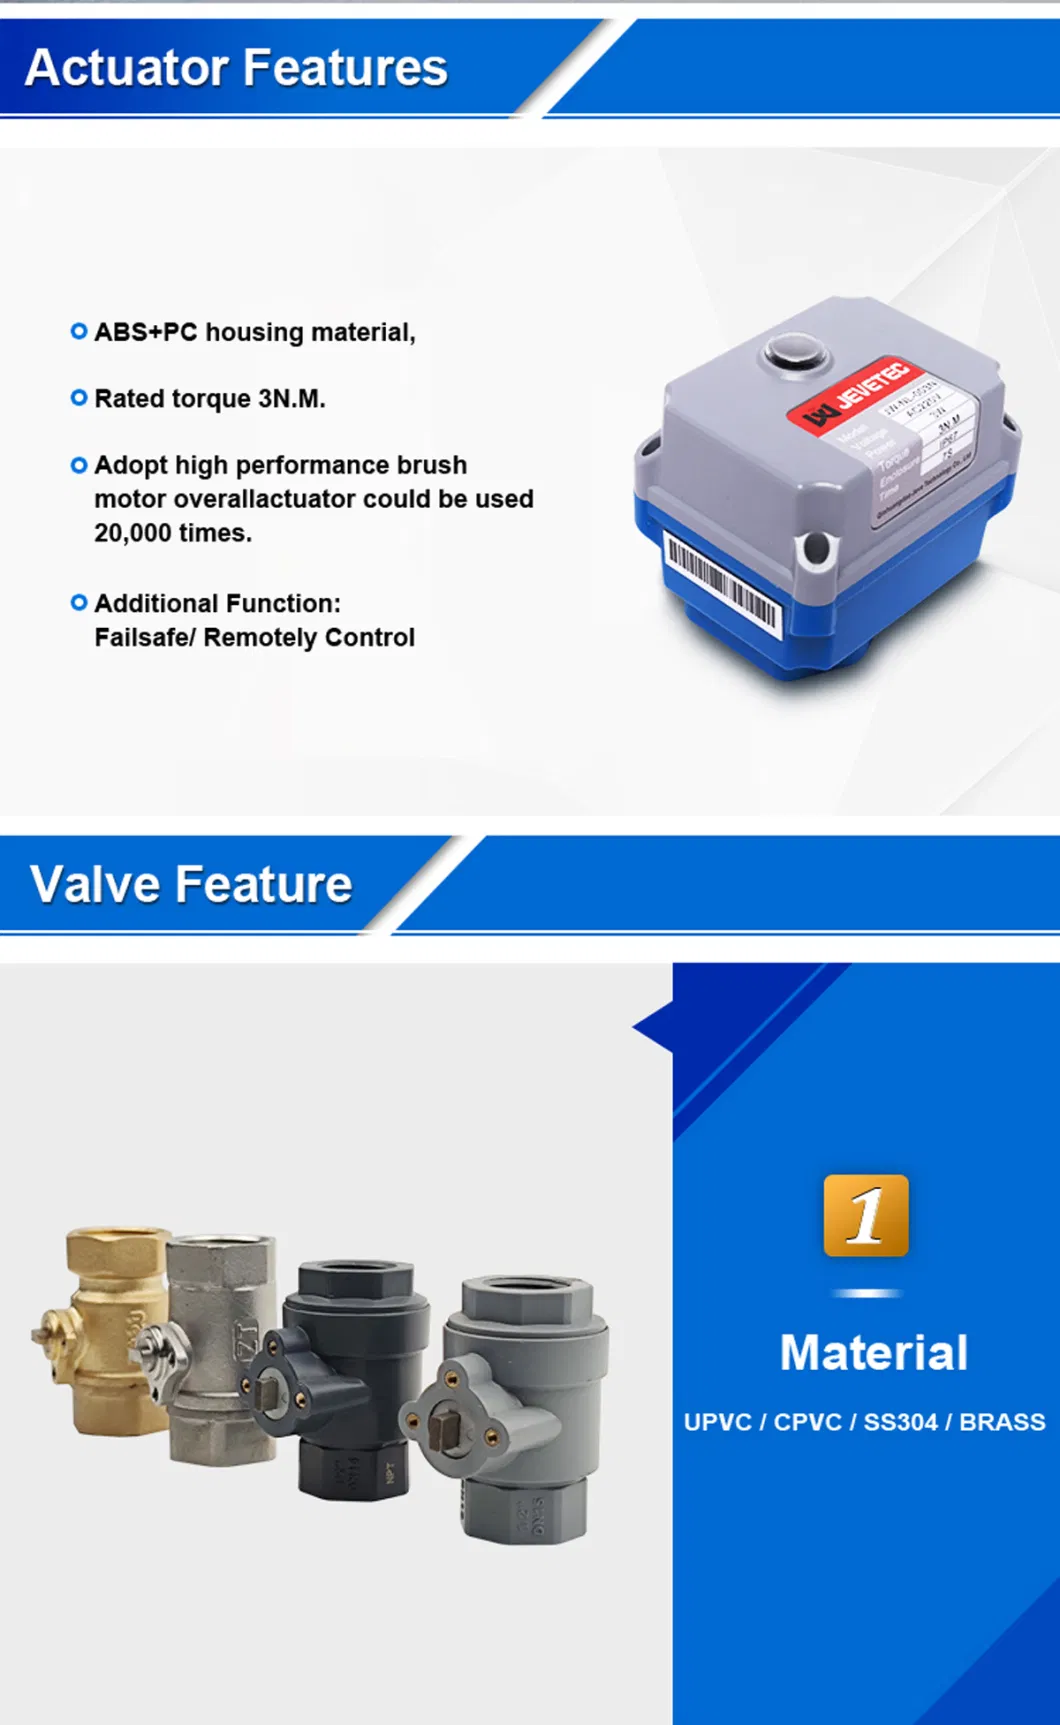 DN20-3/4&quot; Three Lines and One Control Mini Motorized Stainless Ball Valve AC220V/DC24V